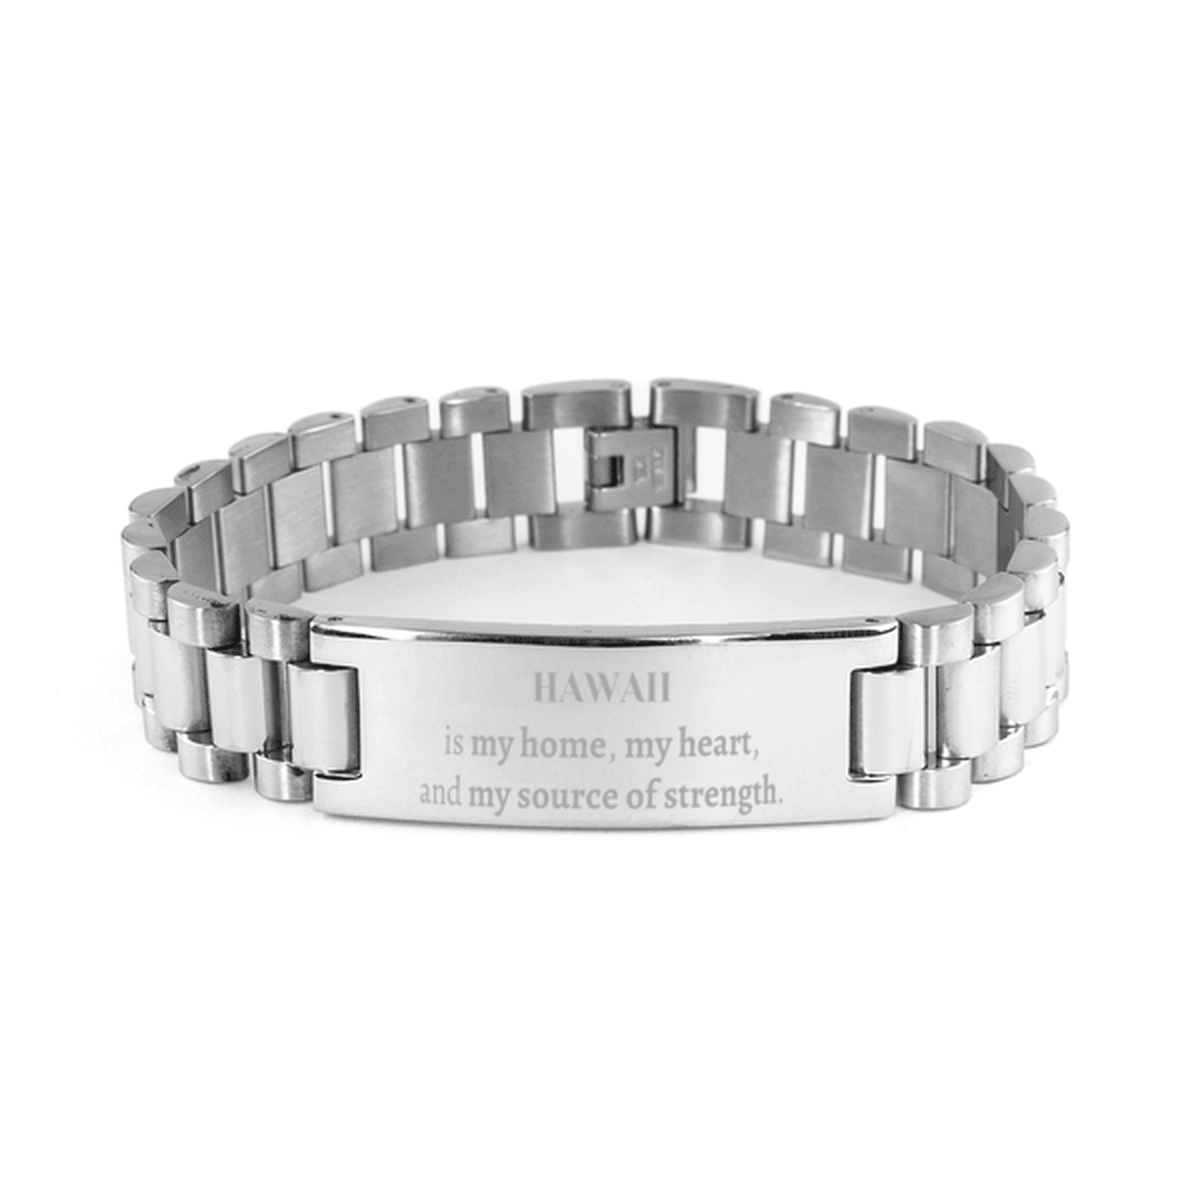 Hawaii is my home Gifts, Lovely Hawaii Birthday Christmas Ladder Stainless Steel Bracelet For People from Hawaii, Men, Women, Friends - Mallard Moon Gift Shop